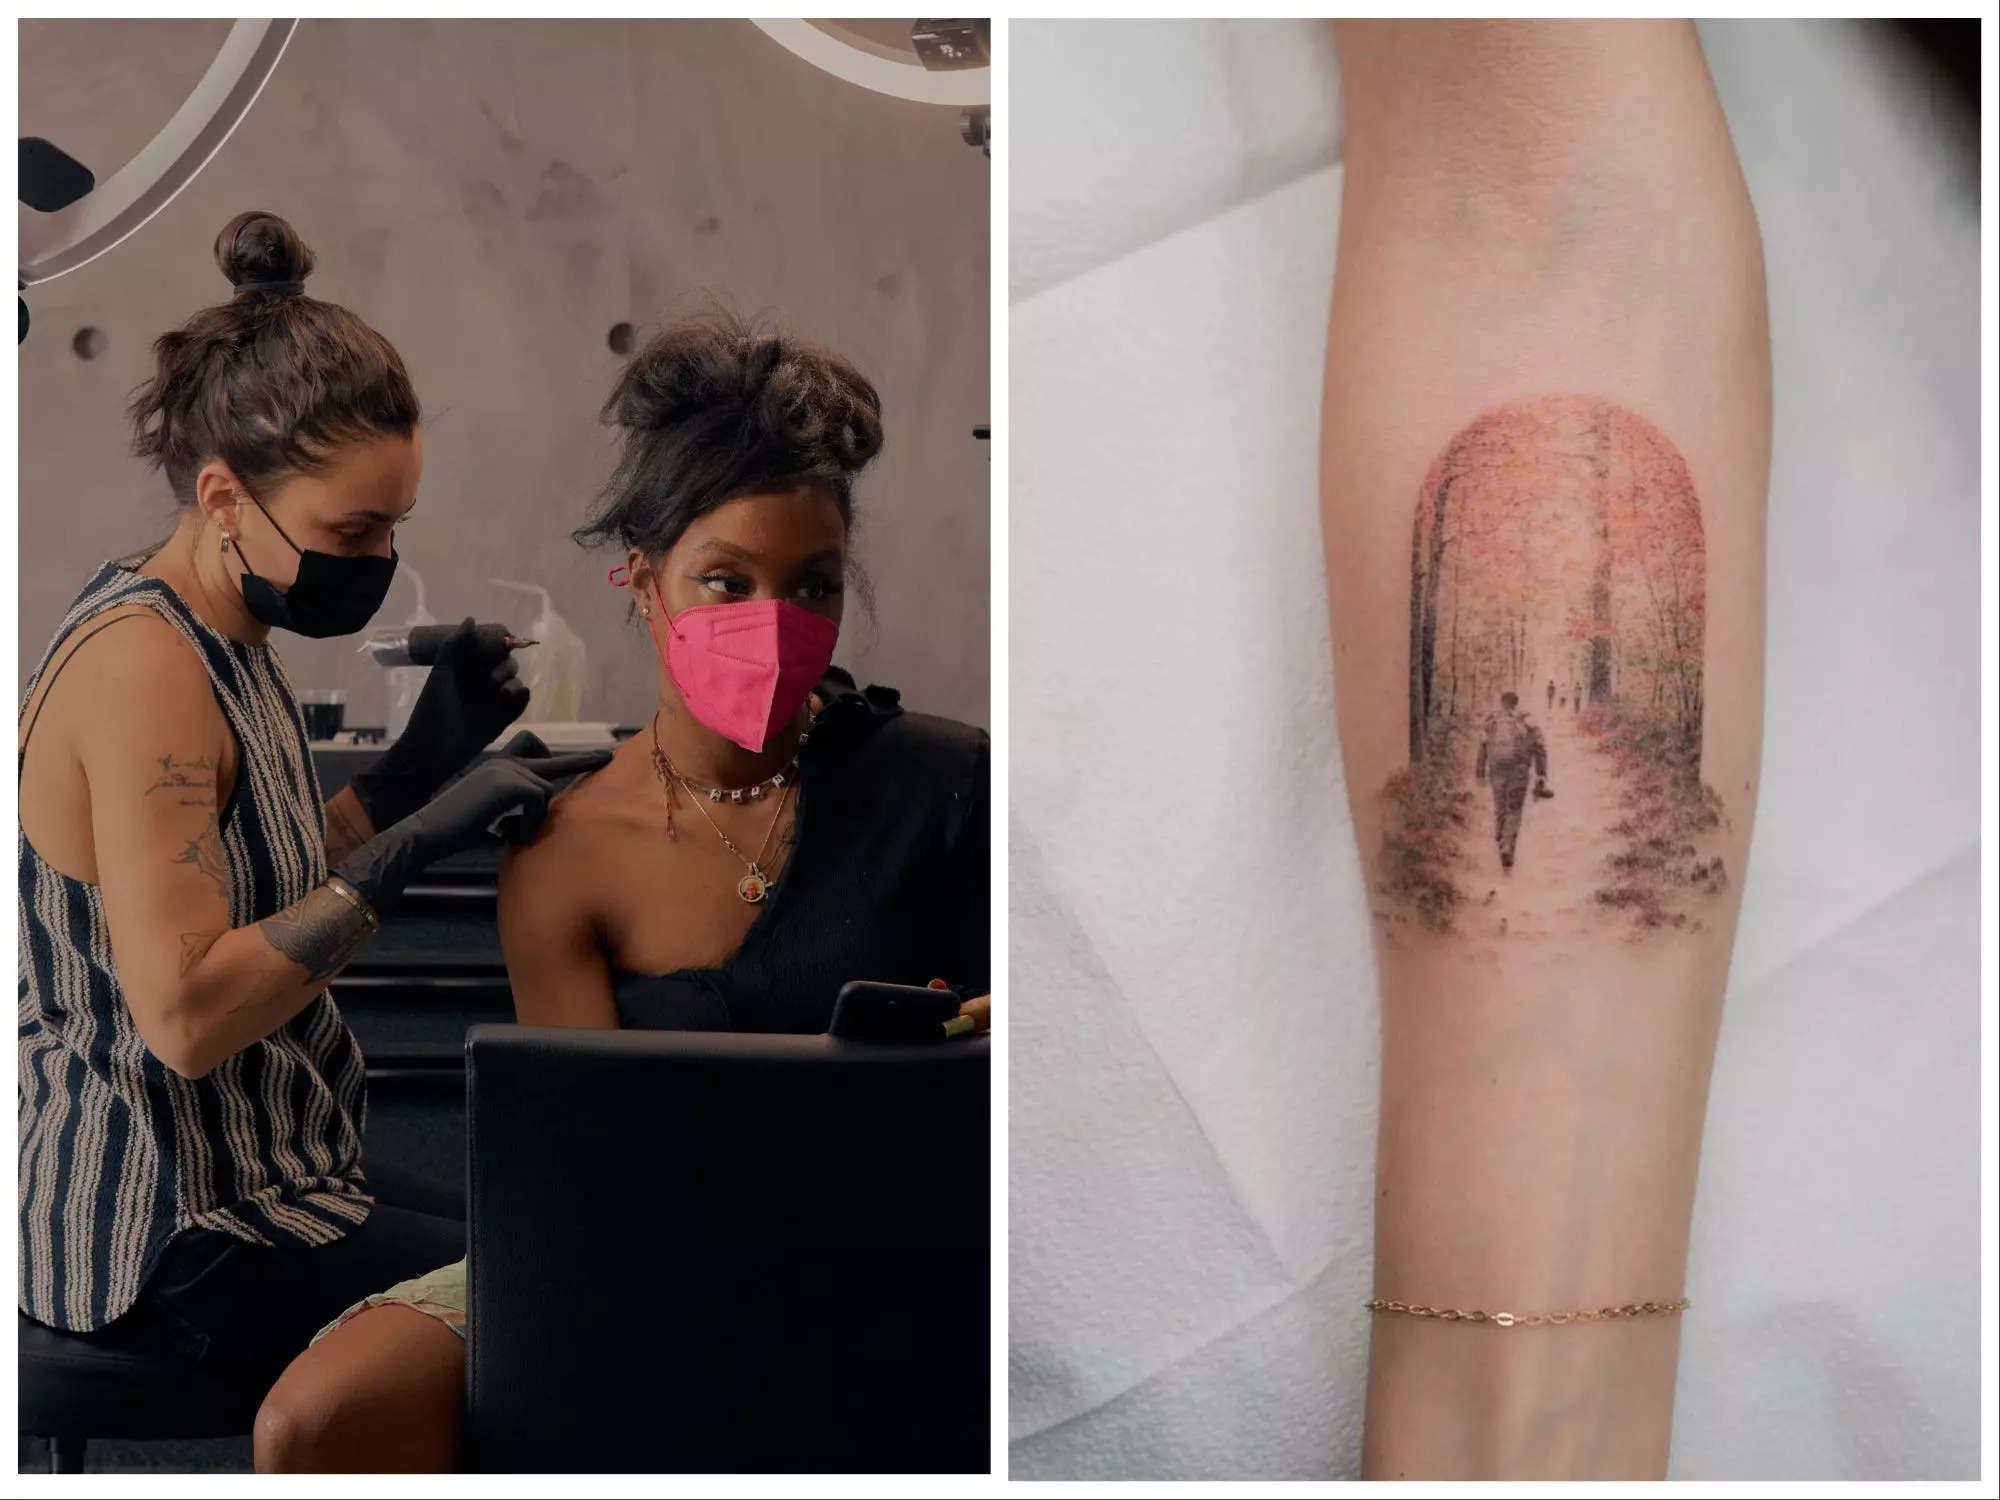 Tattoo Artist Says New Celebrity Trend Is Getting Inked Under Anesthesia